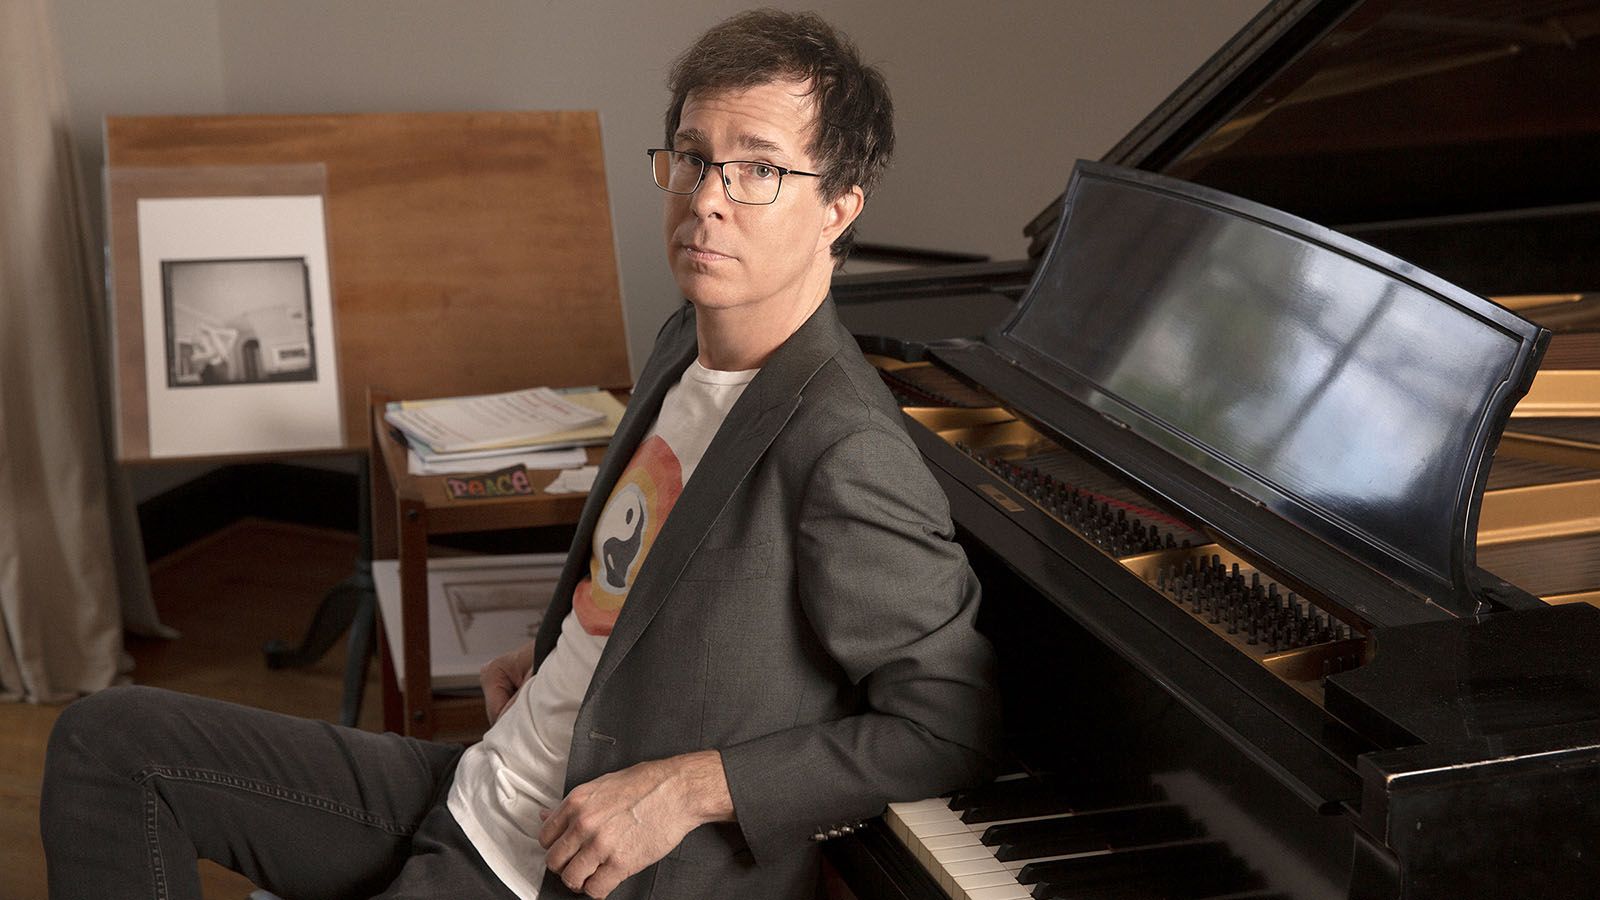 You can catch Ben Folds and a Piano at Clyde Theatre on Tuesday, March 28.